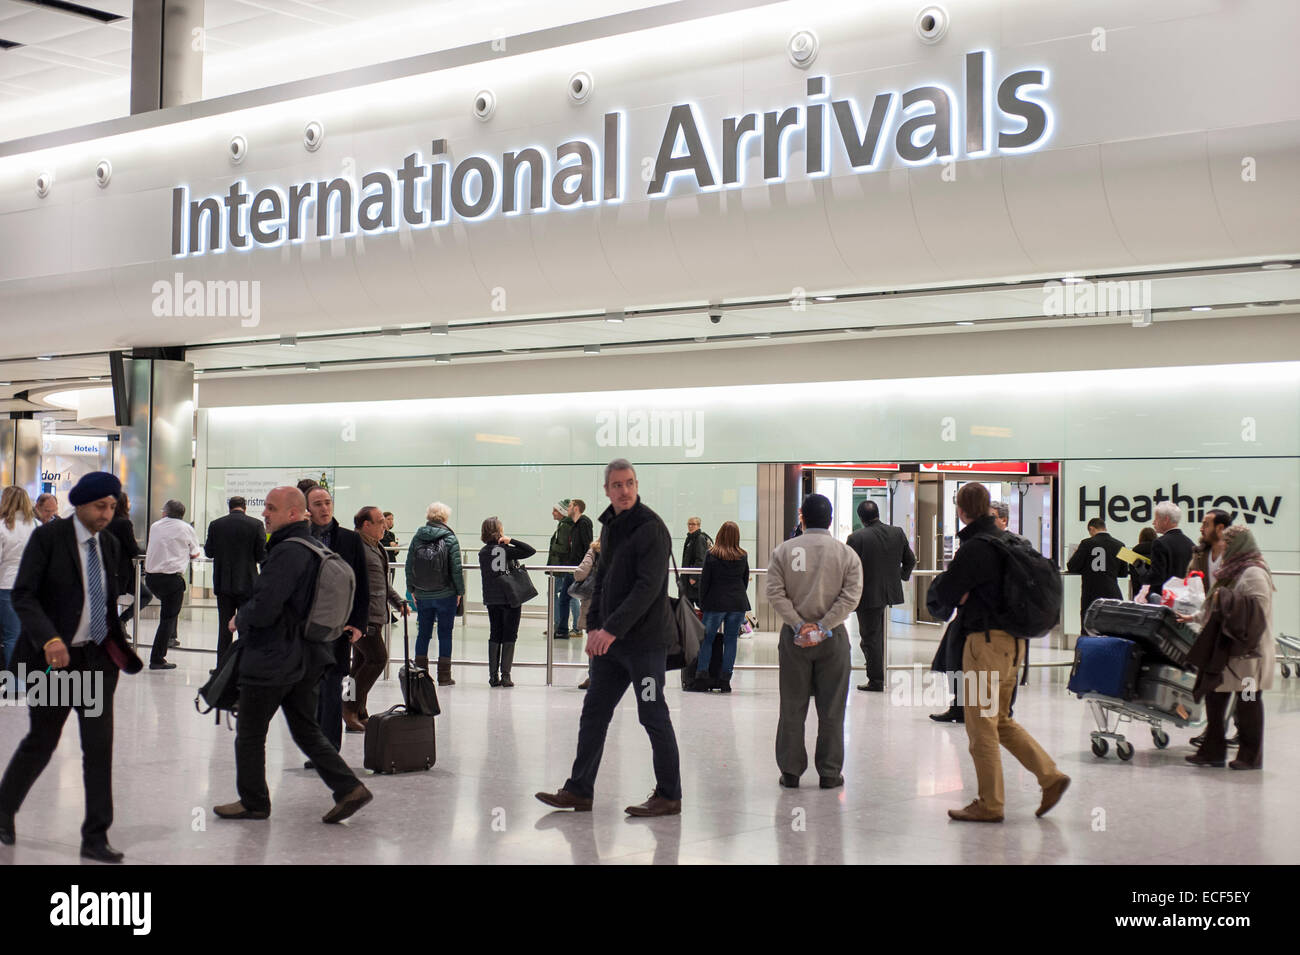 London, UK, 12 December 2014.  A software glitch at the UK's air traffic control centre temporarily halts air traffic over UK airspace resulting in delays and cancelled flights for many at Heathrow airport.  Pictured : Terminal 2 arrivals.  Credit:  Stephen Chung/Alamy Live News Stock Photo